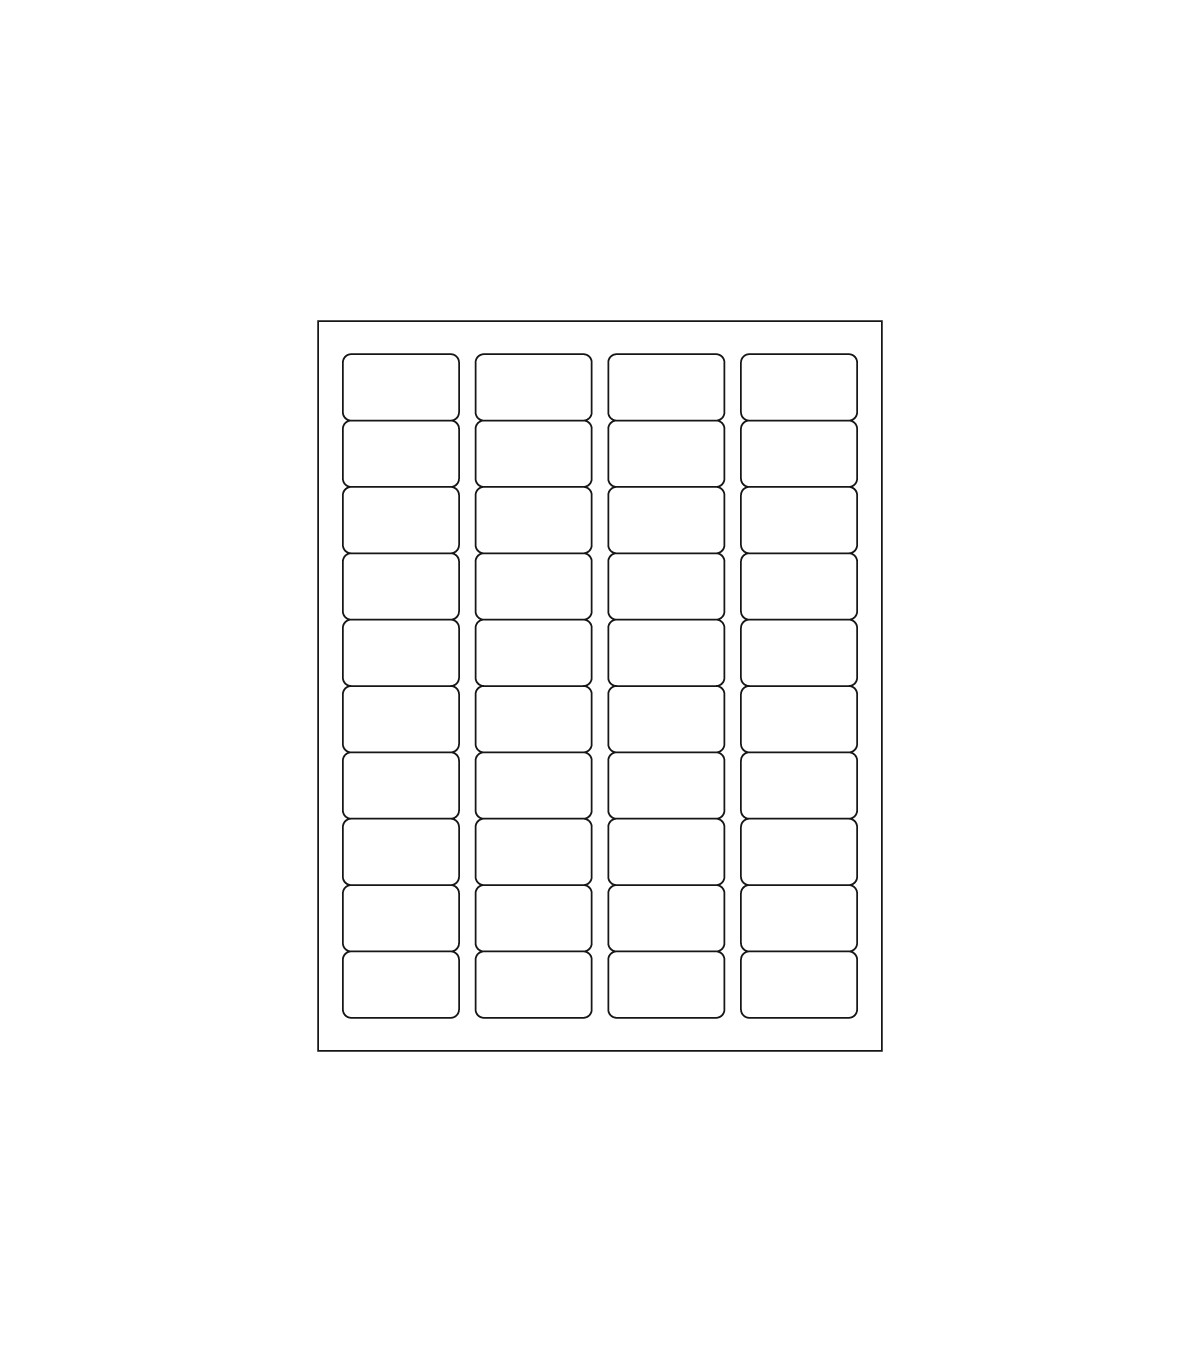 1 X 1 Label Template